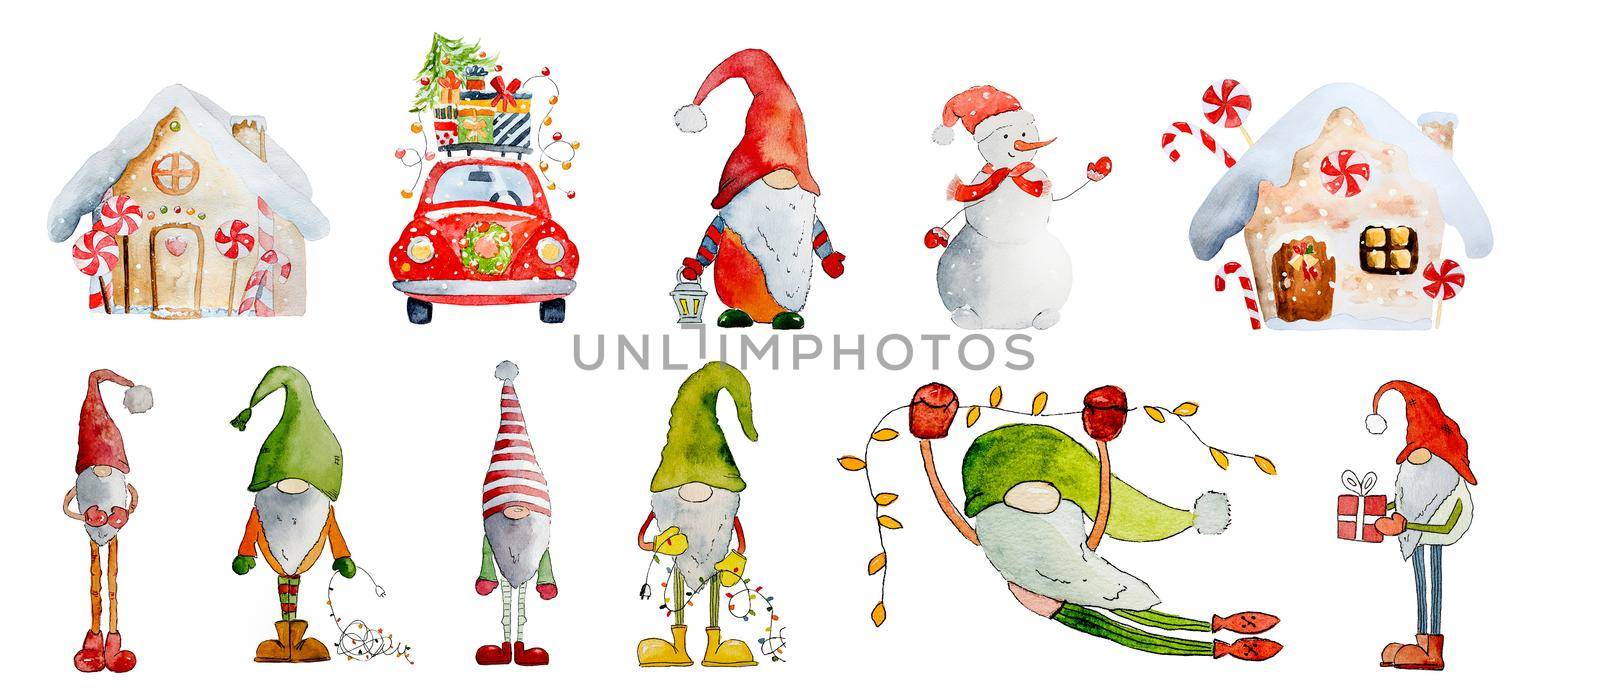 Christmas card with cute dwarfs, Santa Claus helpers, painted with watercolor and isolated on white background. New Year festive art with cartoon character elfs drawn with aquarelle